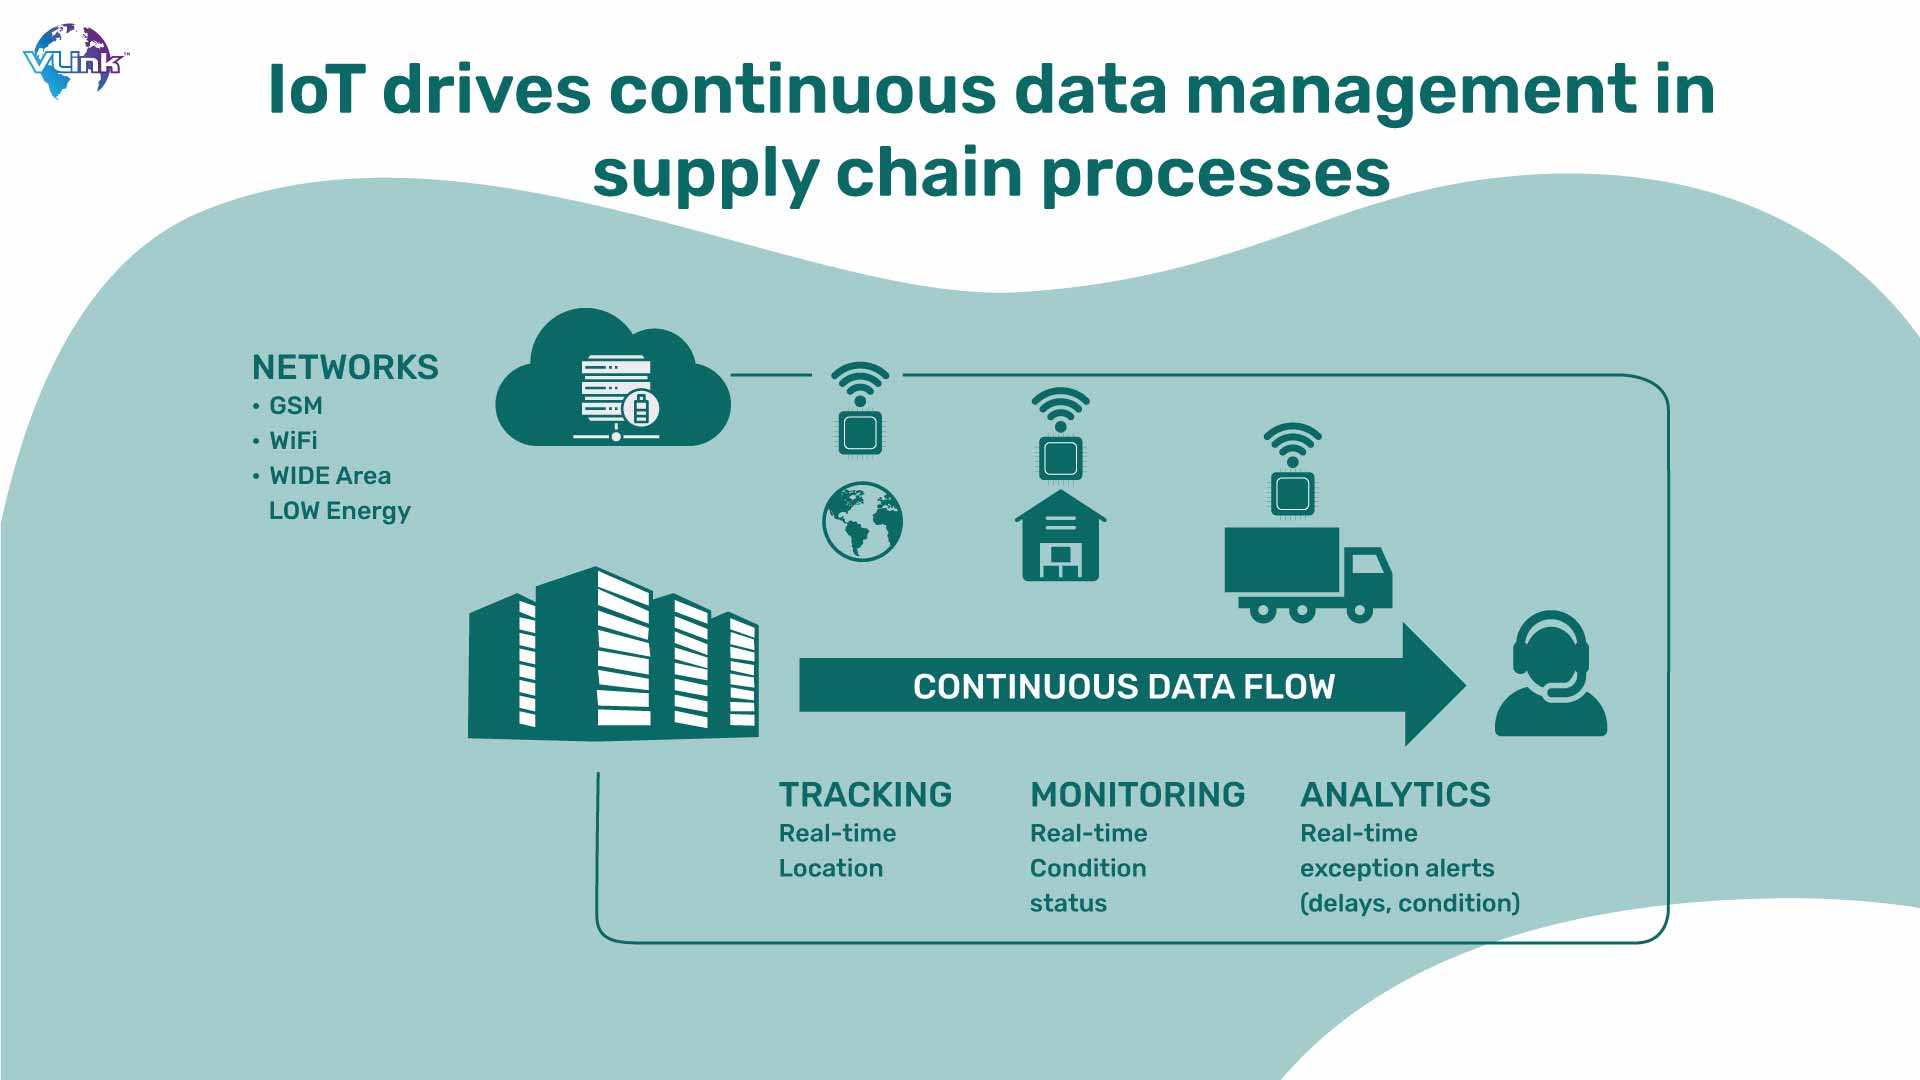 IOT drives continuous data management in supply chain processess